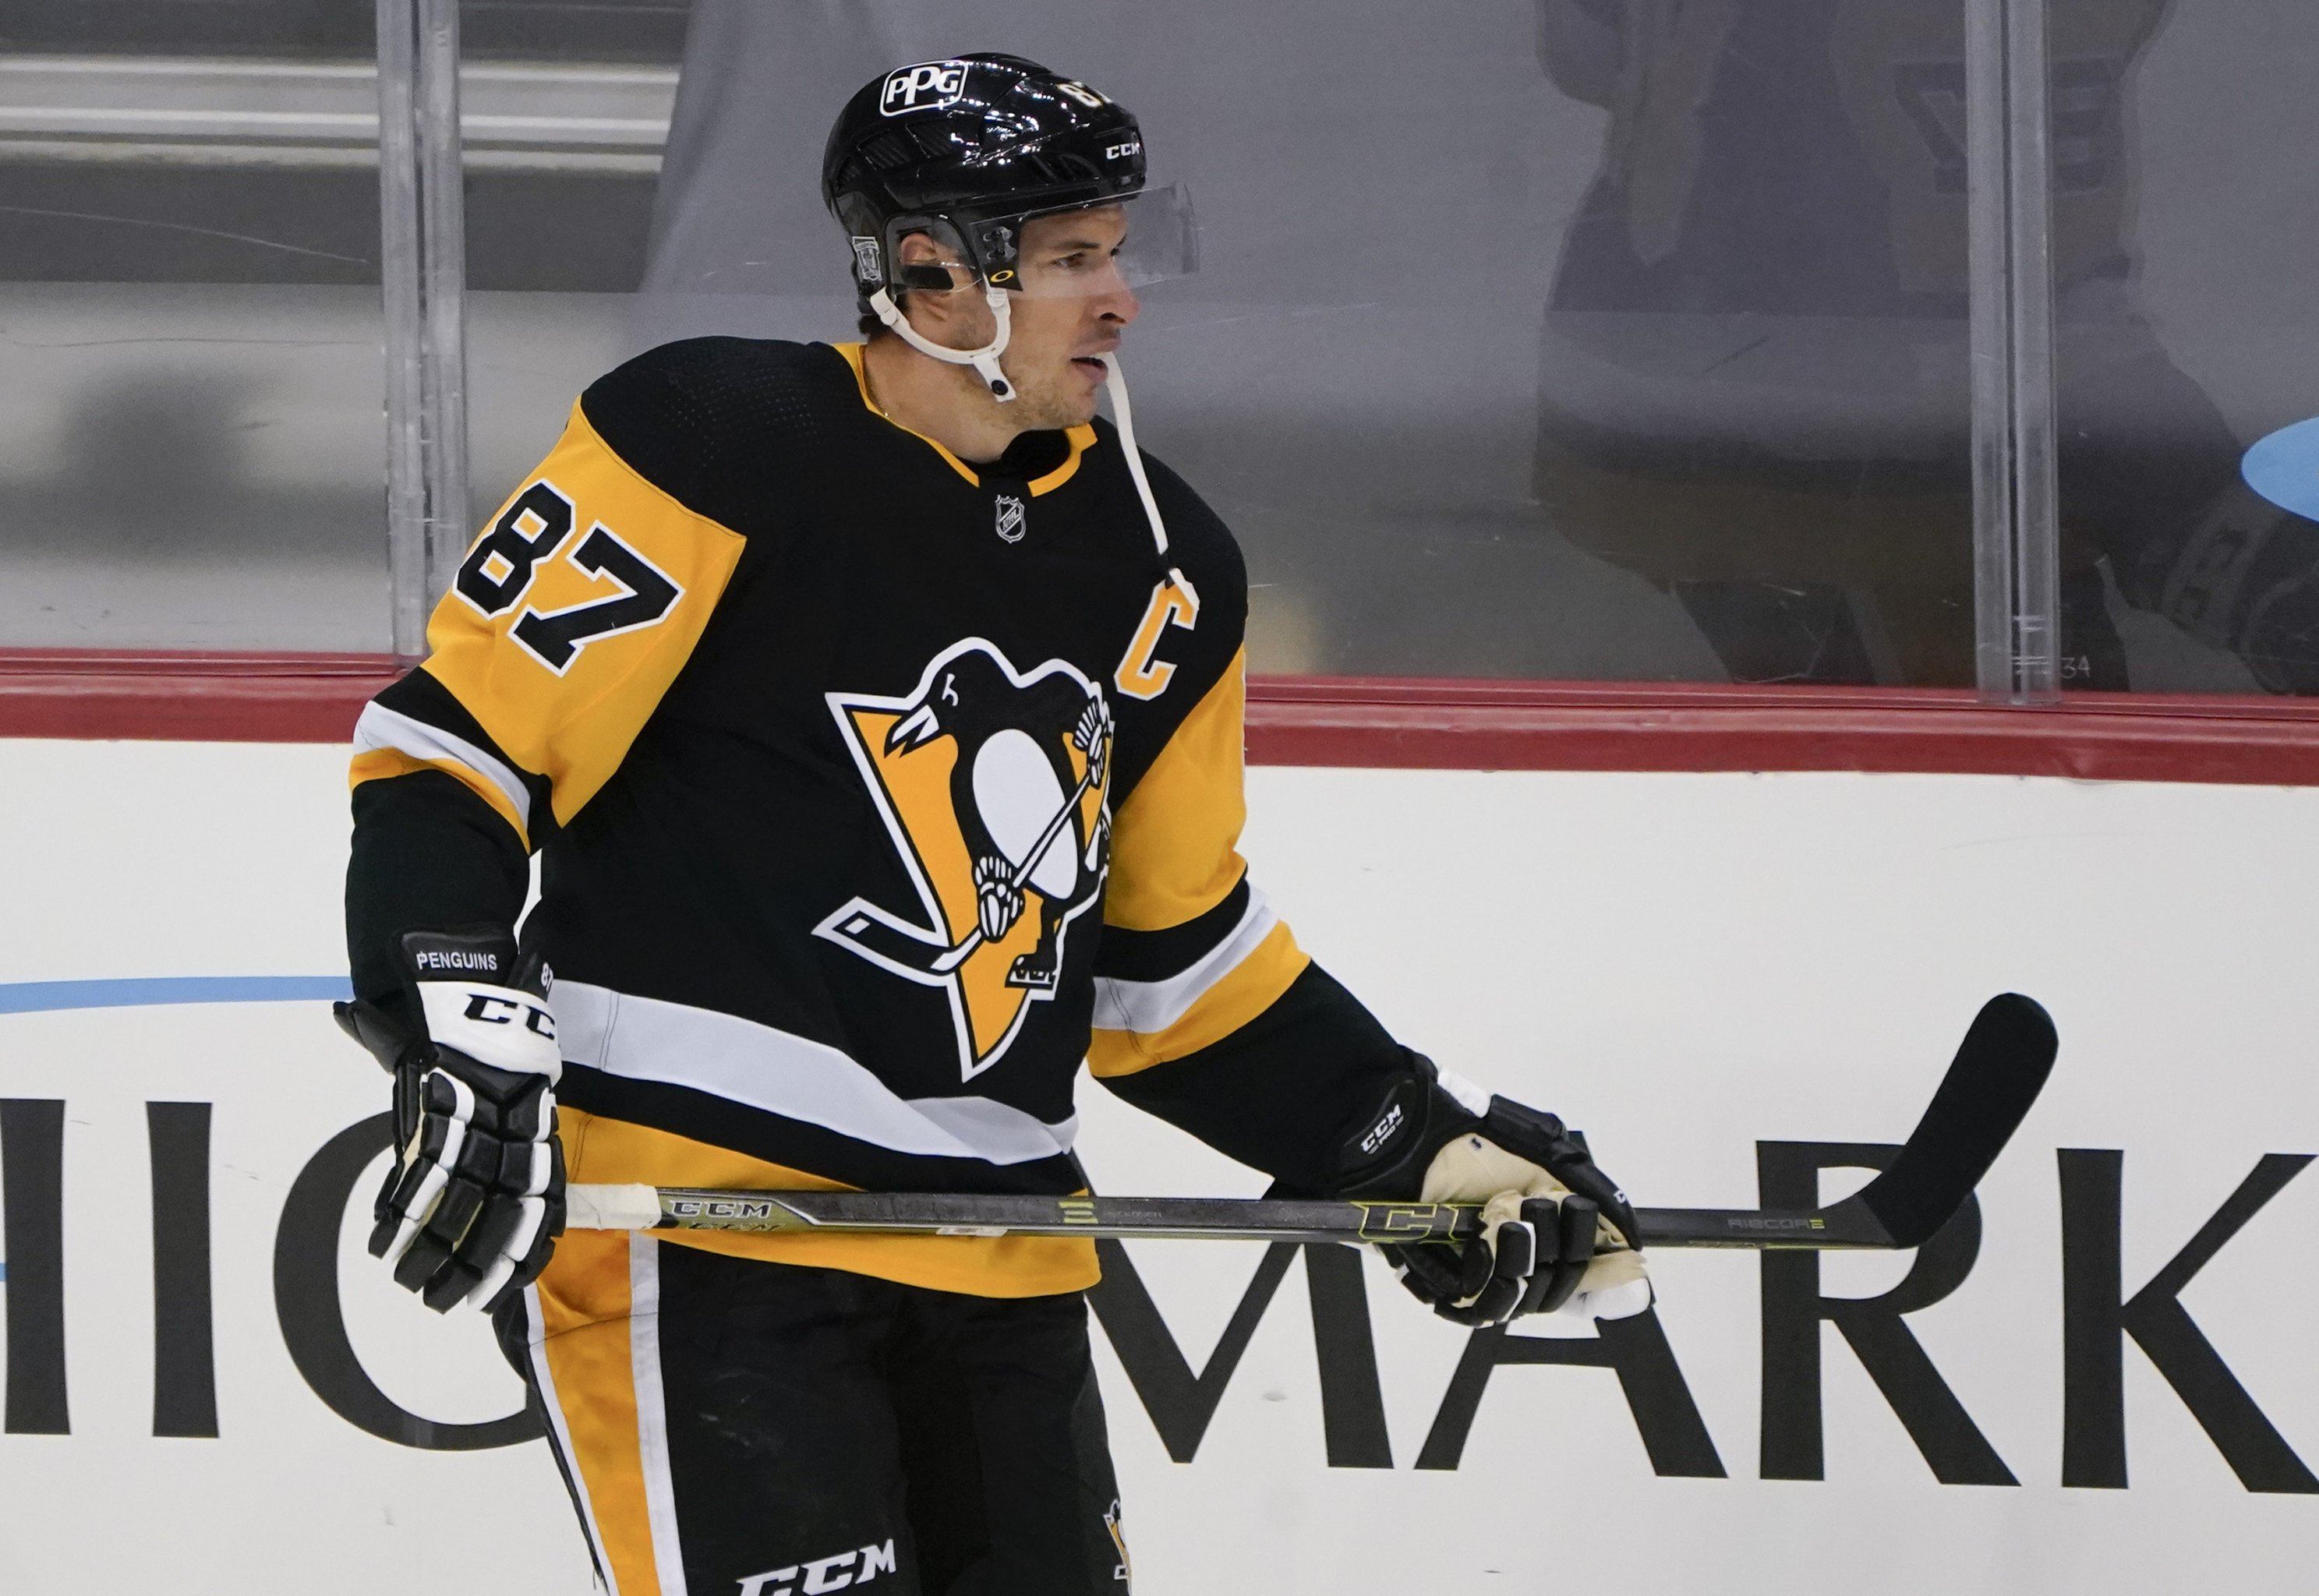 Sidney Crosby will suit up for Team Canada at world hockey